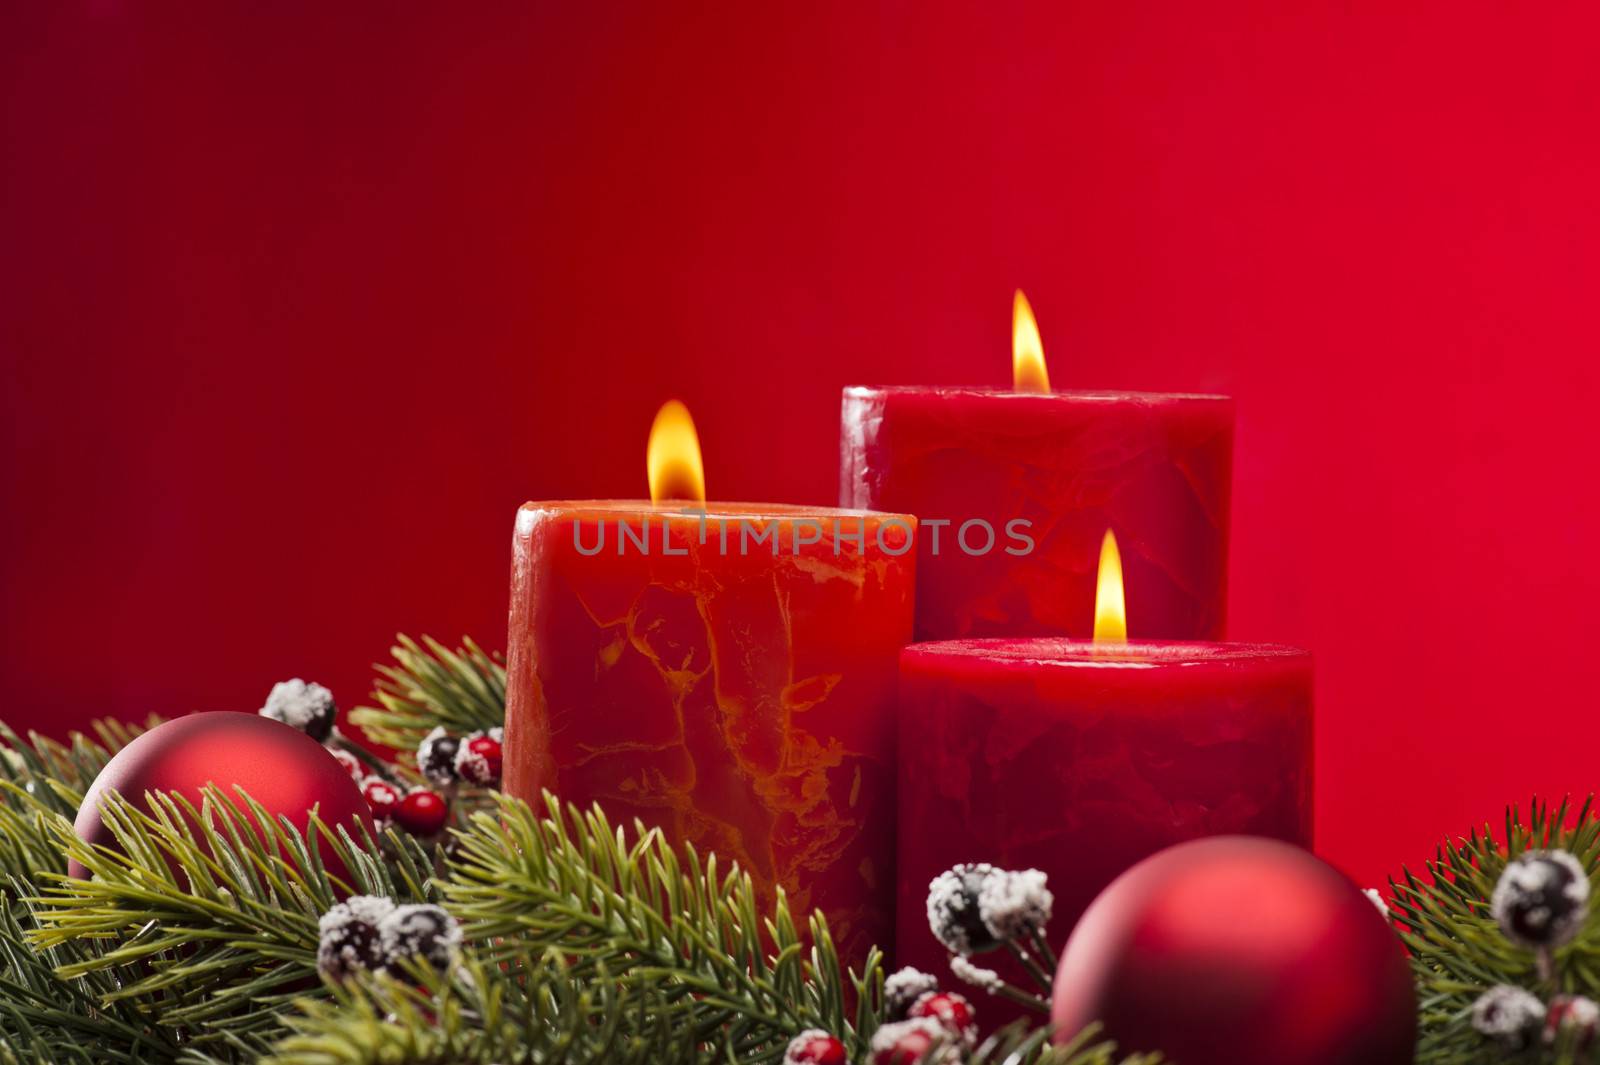 Red advent flower arrangement with burning candles